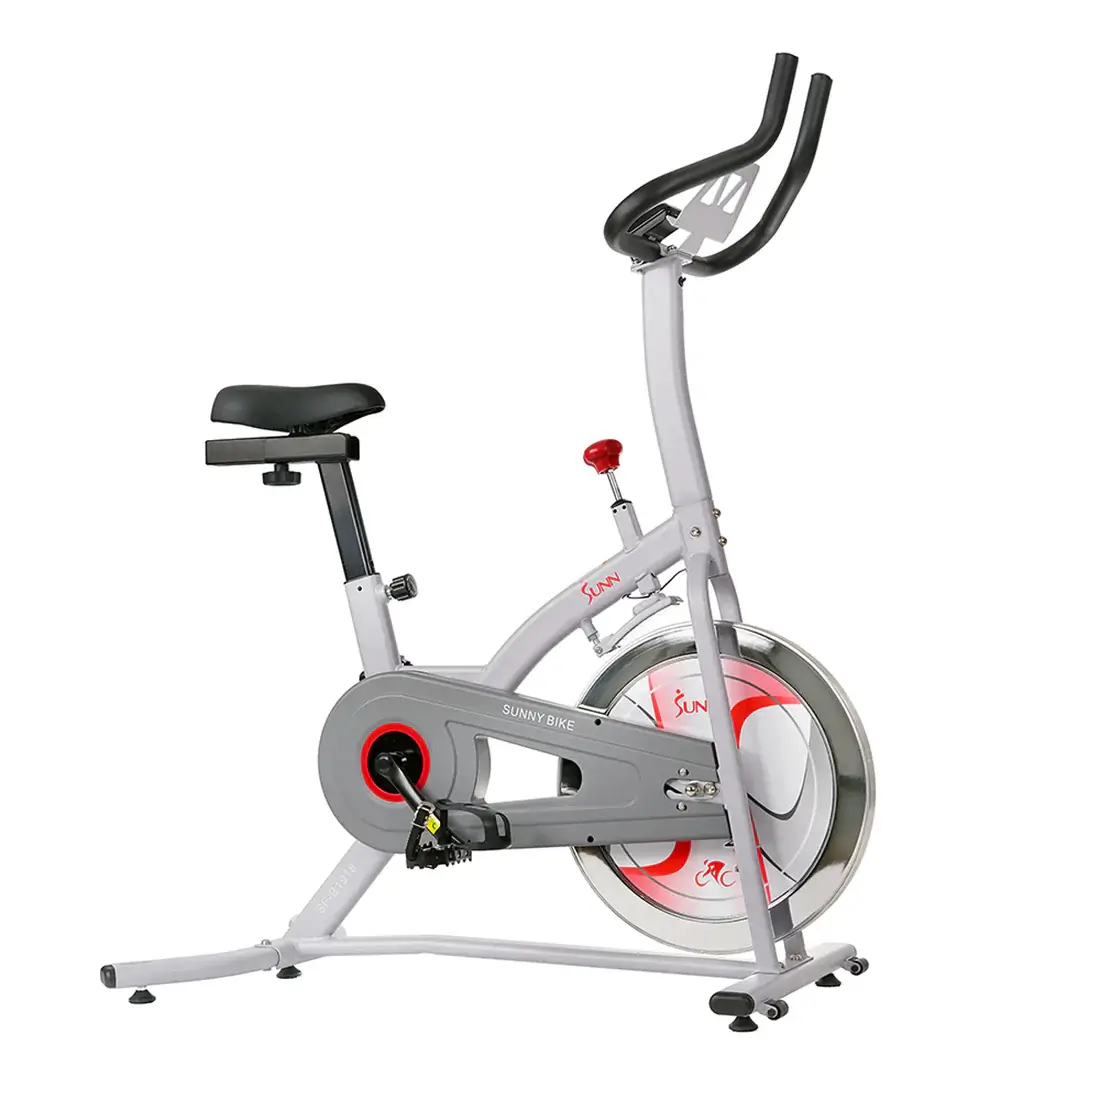 GP Pro Sun Magnetic Resistance Indoor Cycling Exercise Bike